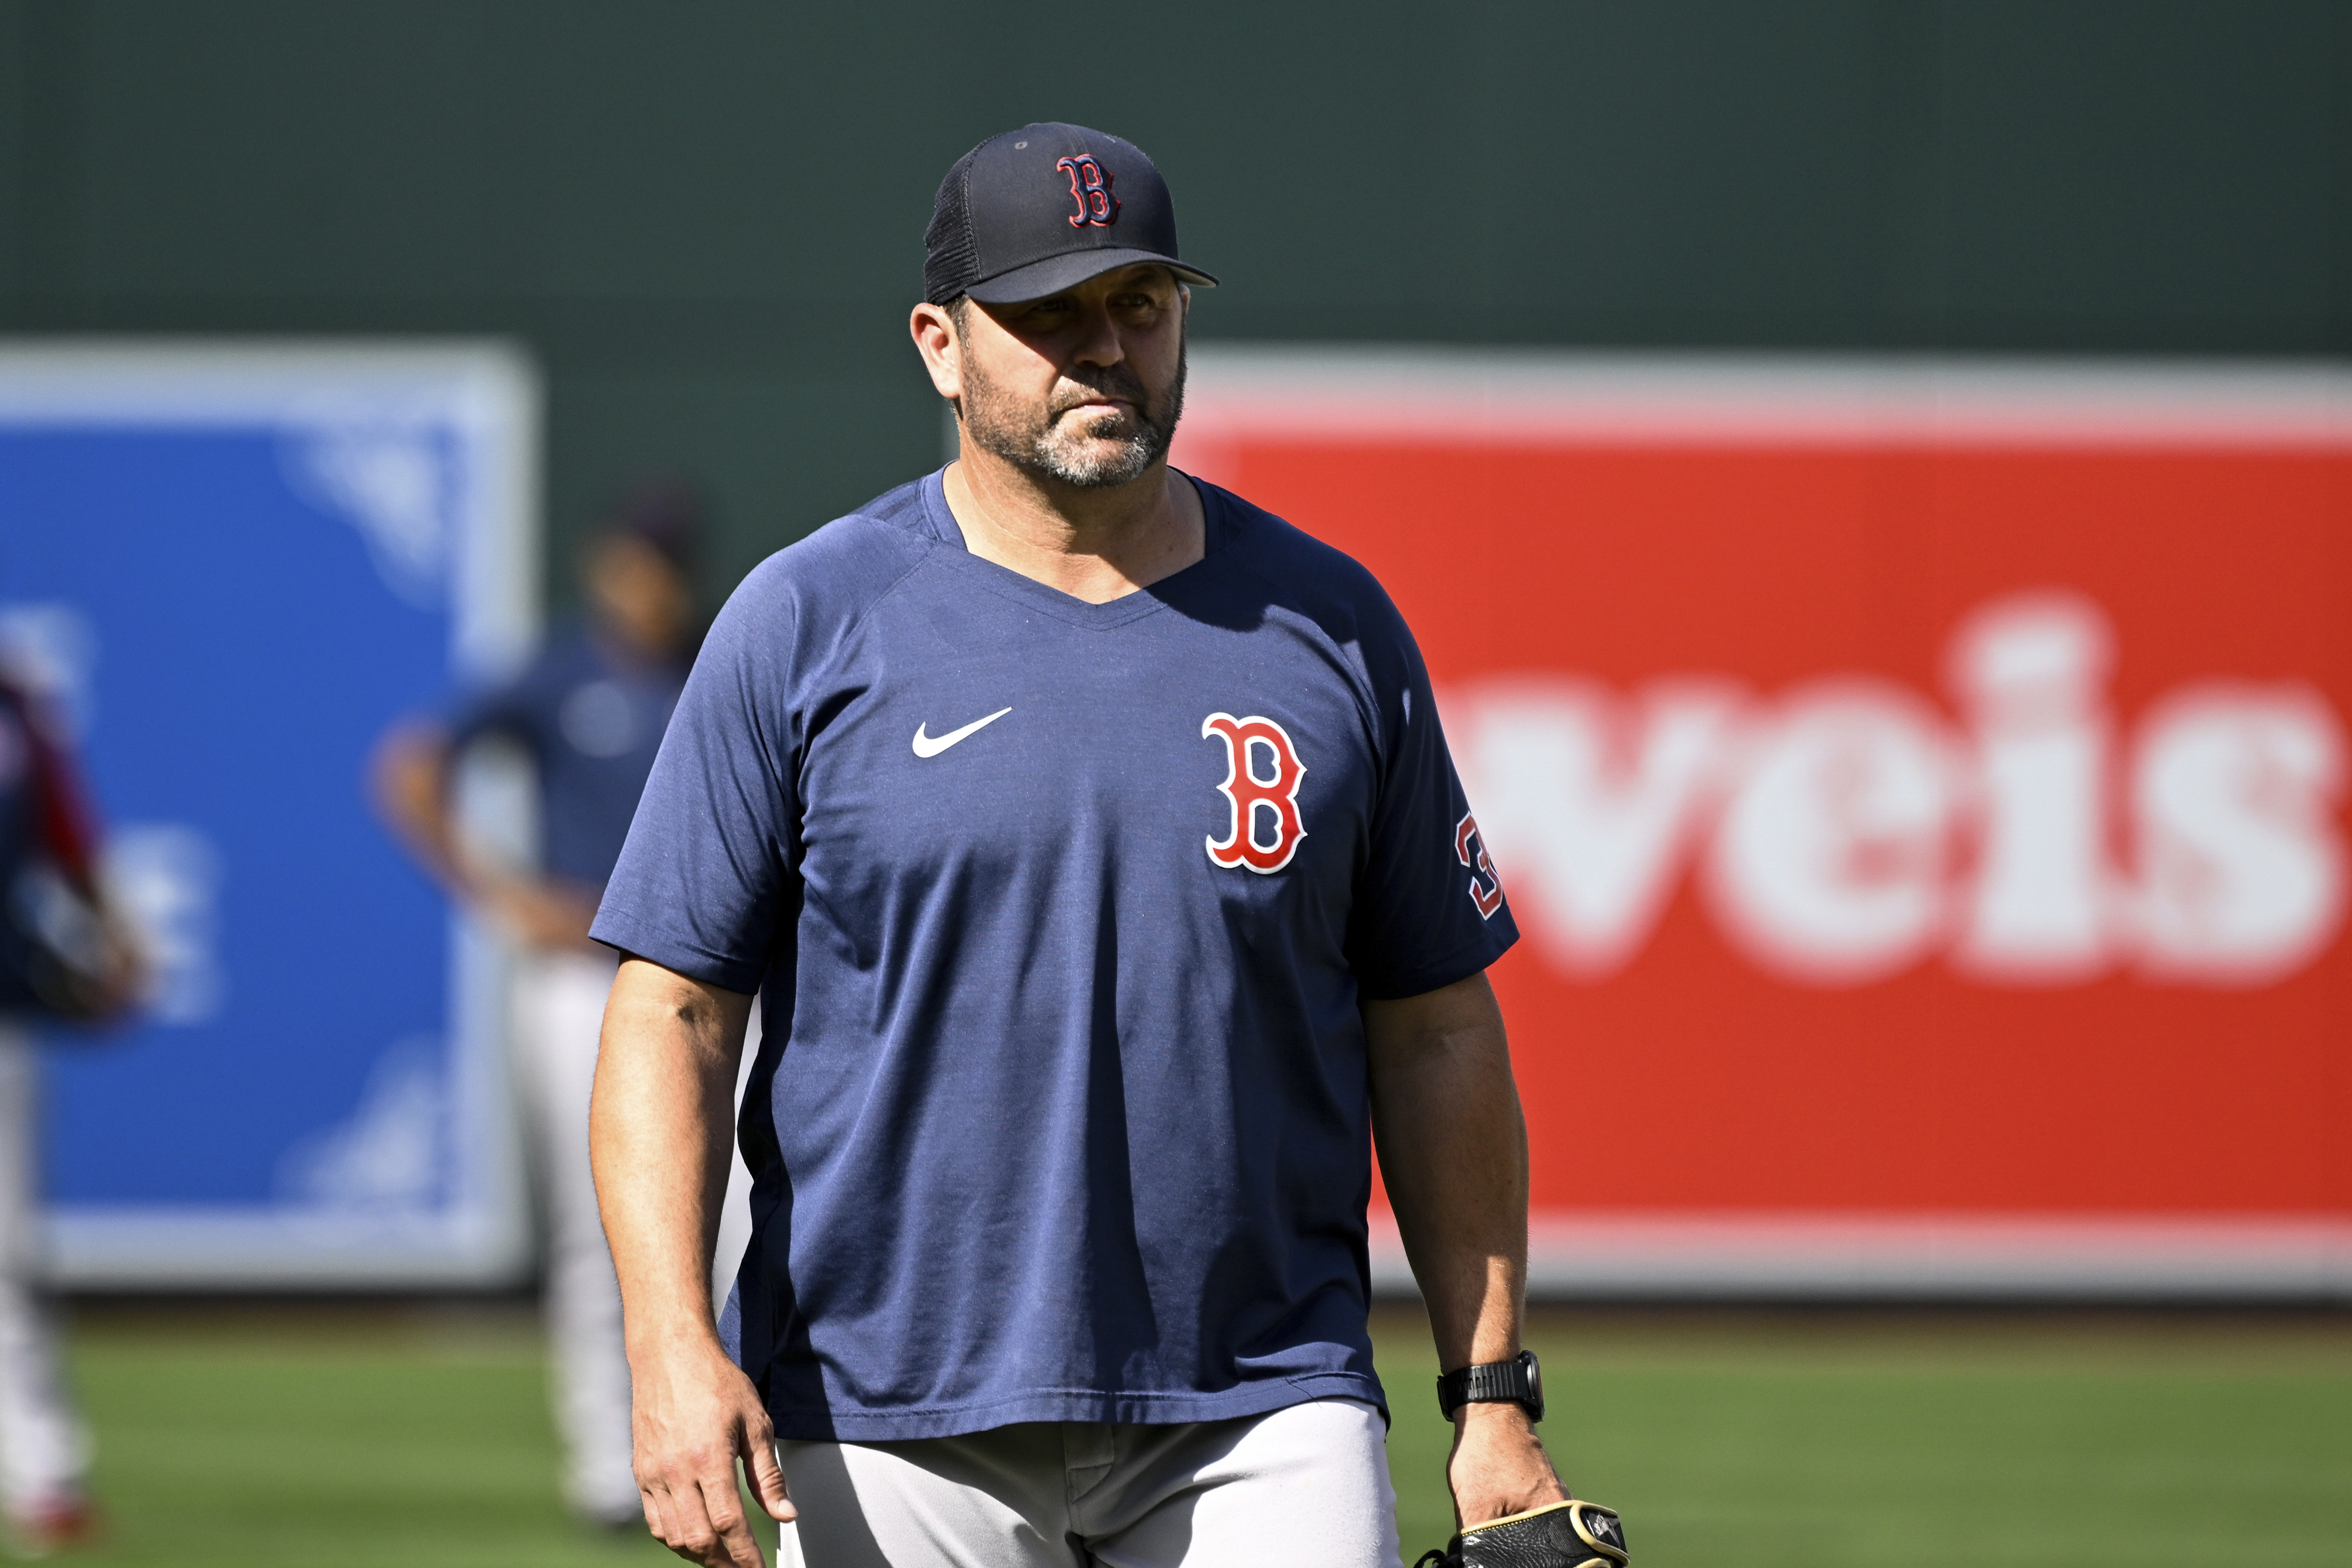 Jason Varitek signs 1-year deal to stay with Red Sox